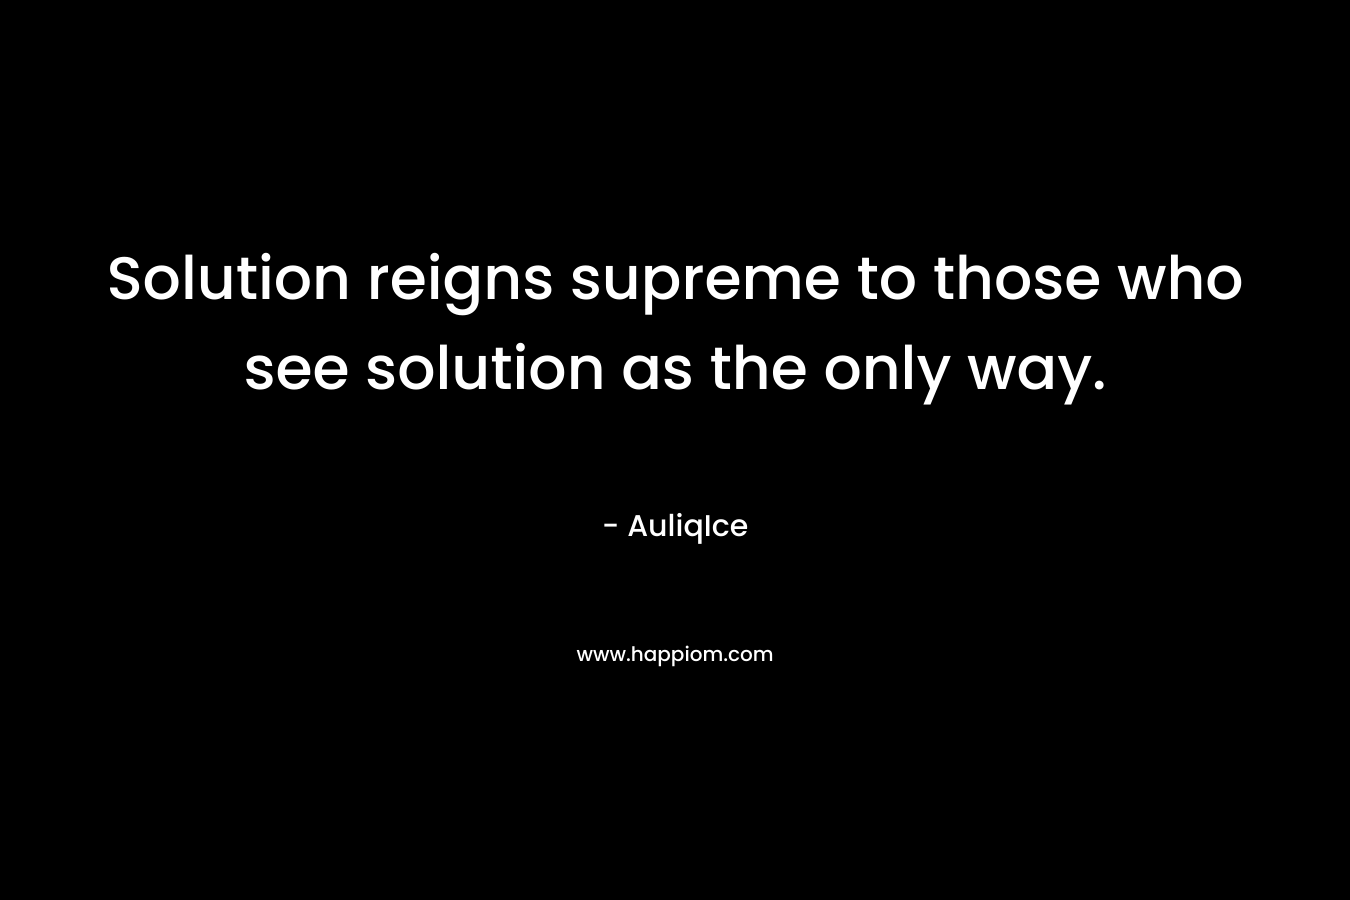 Solution reigns supreme to those who see solution as the only way.